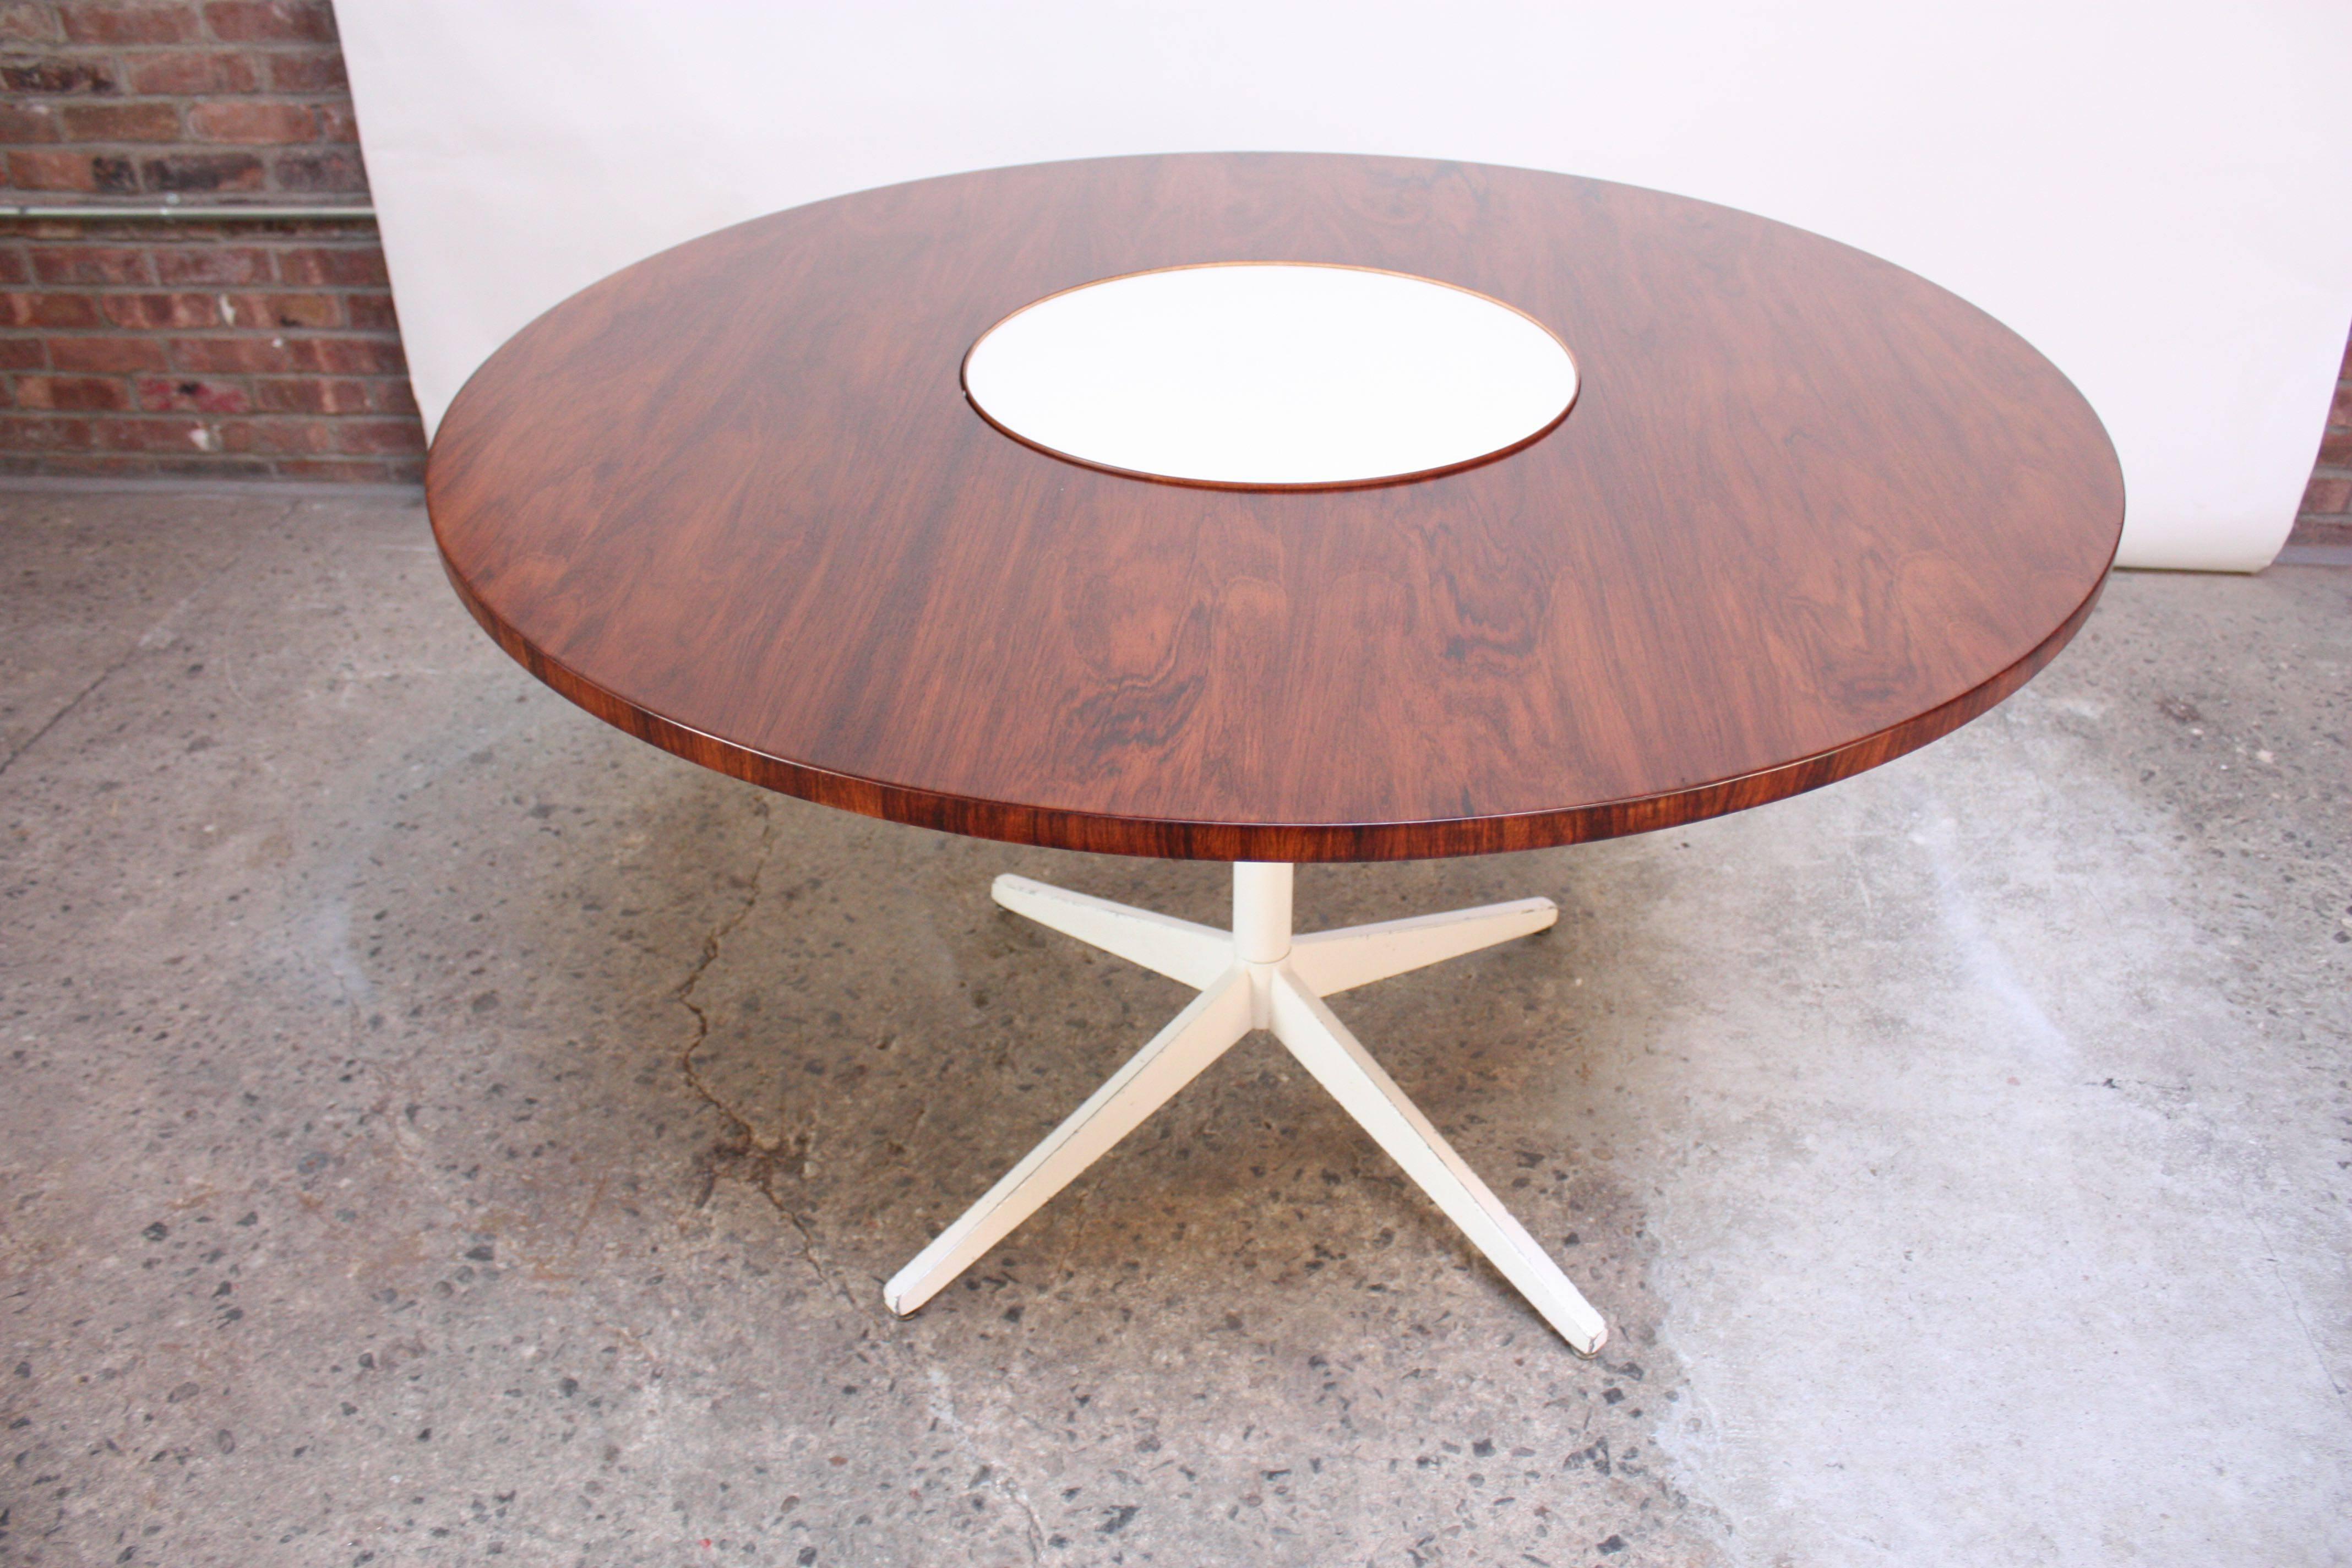 This circular table was designed by George Nelson for Herman Miller in the 1950s and features a rosewood top and trim. In the center is a functional 'Lazy Susan' in white laminate, insulated in rosewood, allowing for full 360 easy access. This